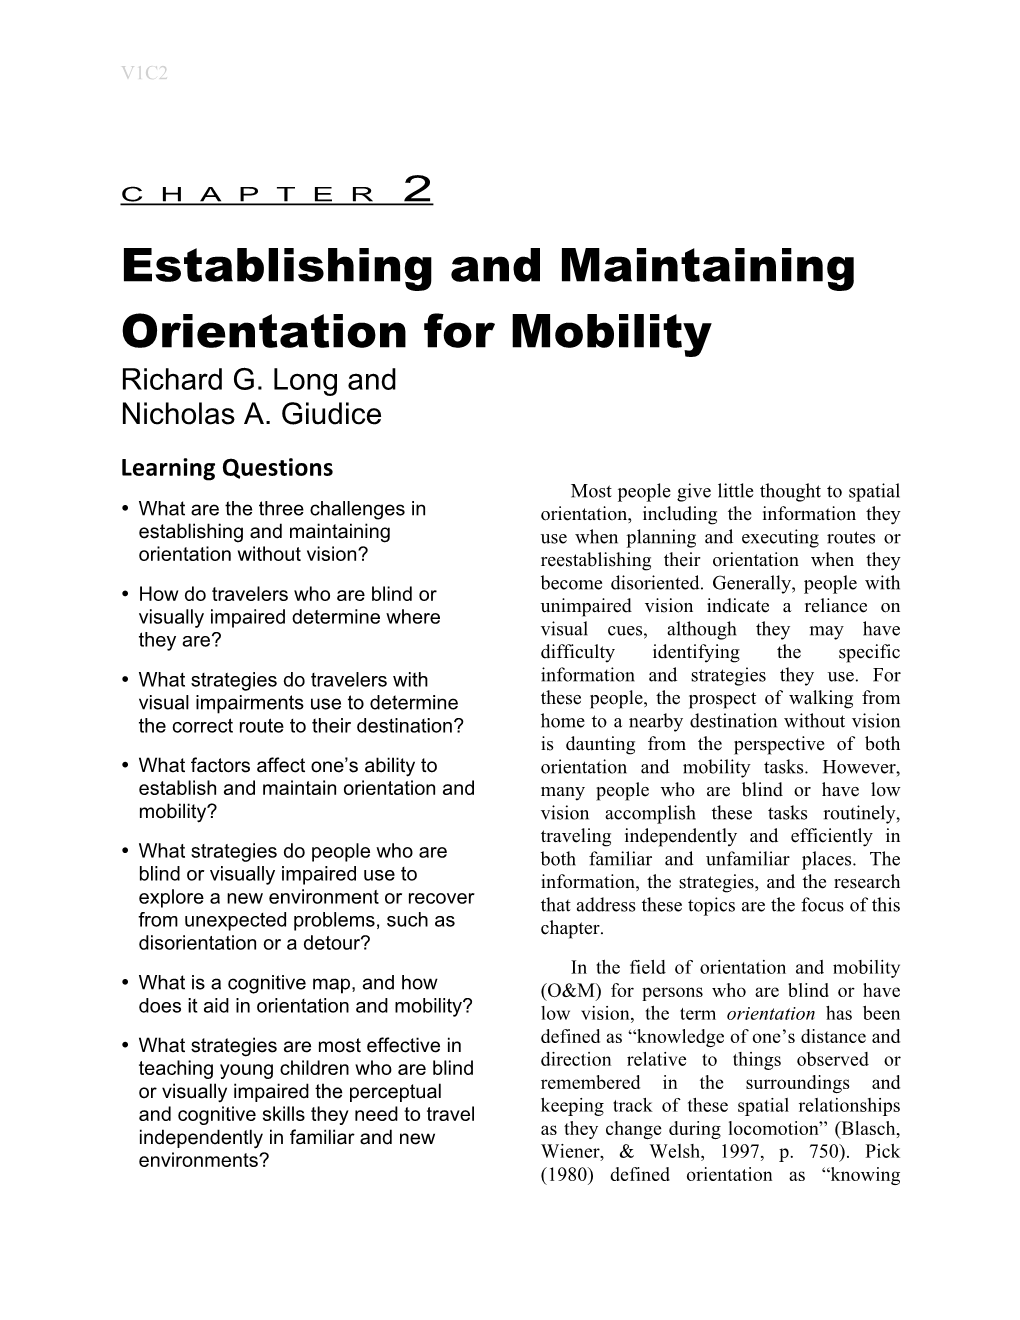 Orientation and Mobility (Foundations of O&M)